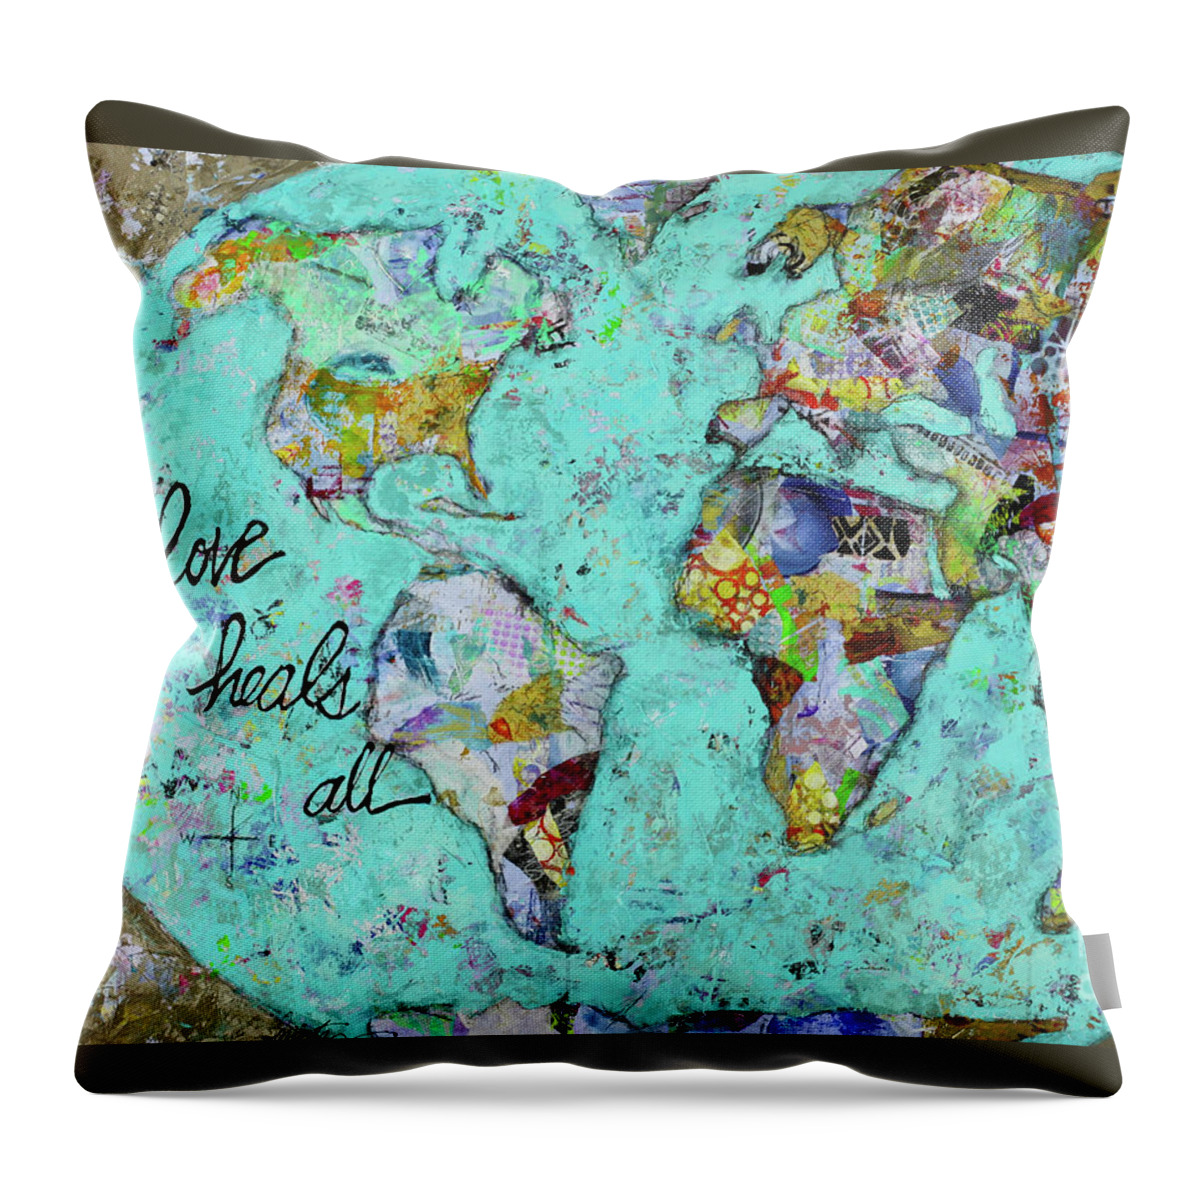 World Throw Pillow featuring the painting Love Heals All by Kirsten Koza Reed